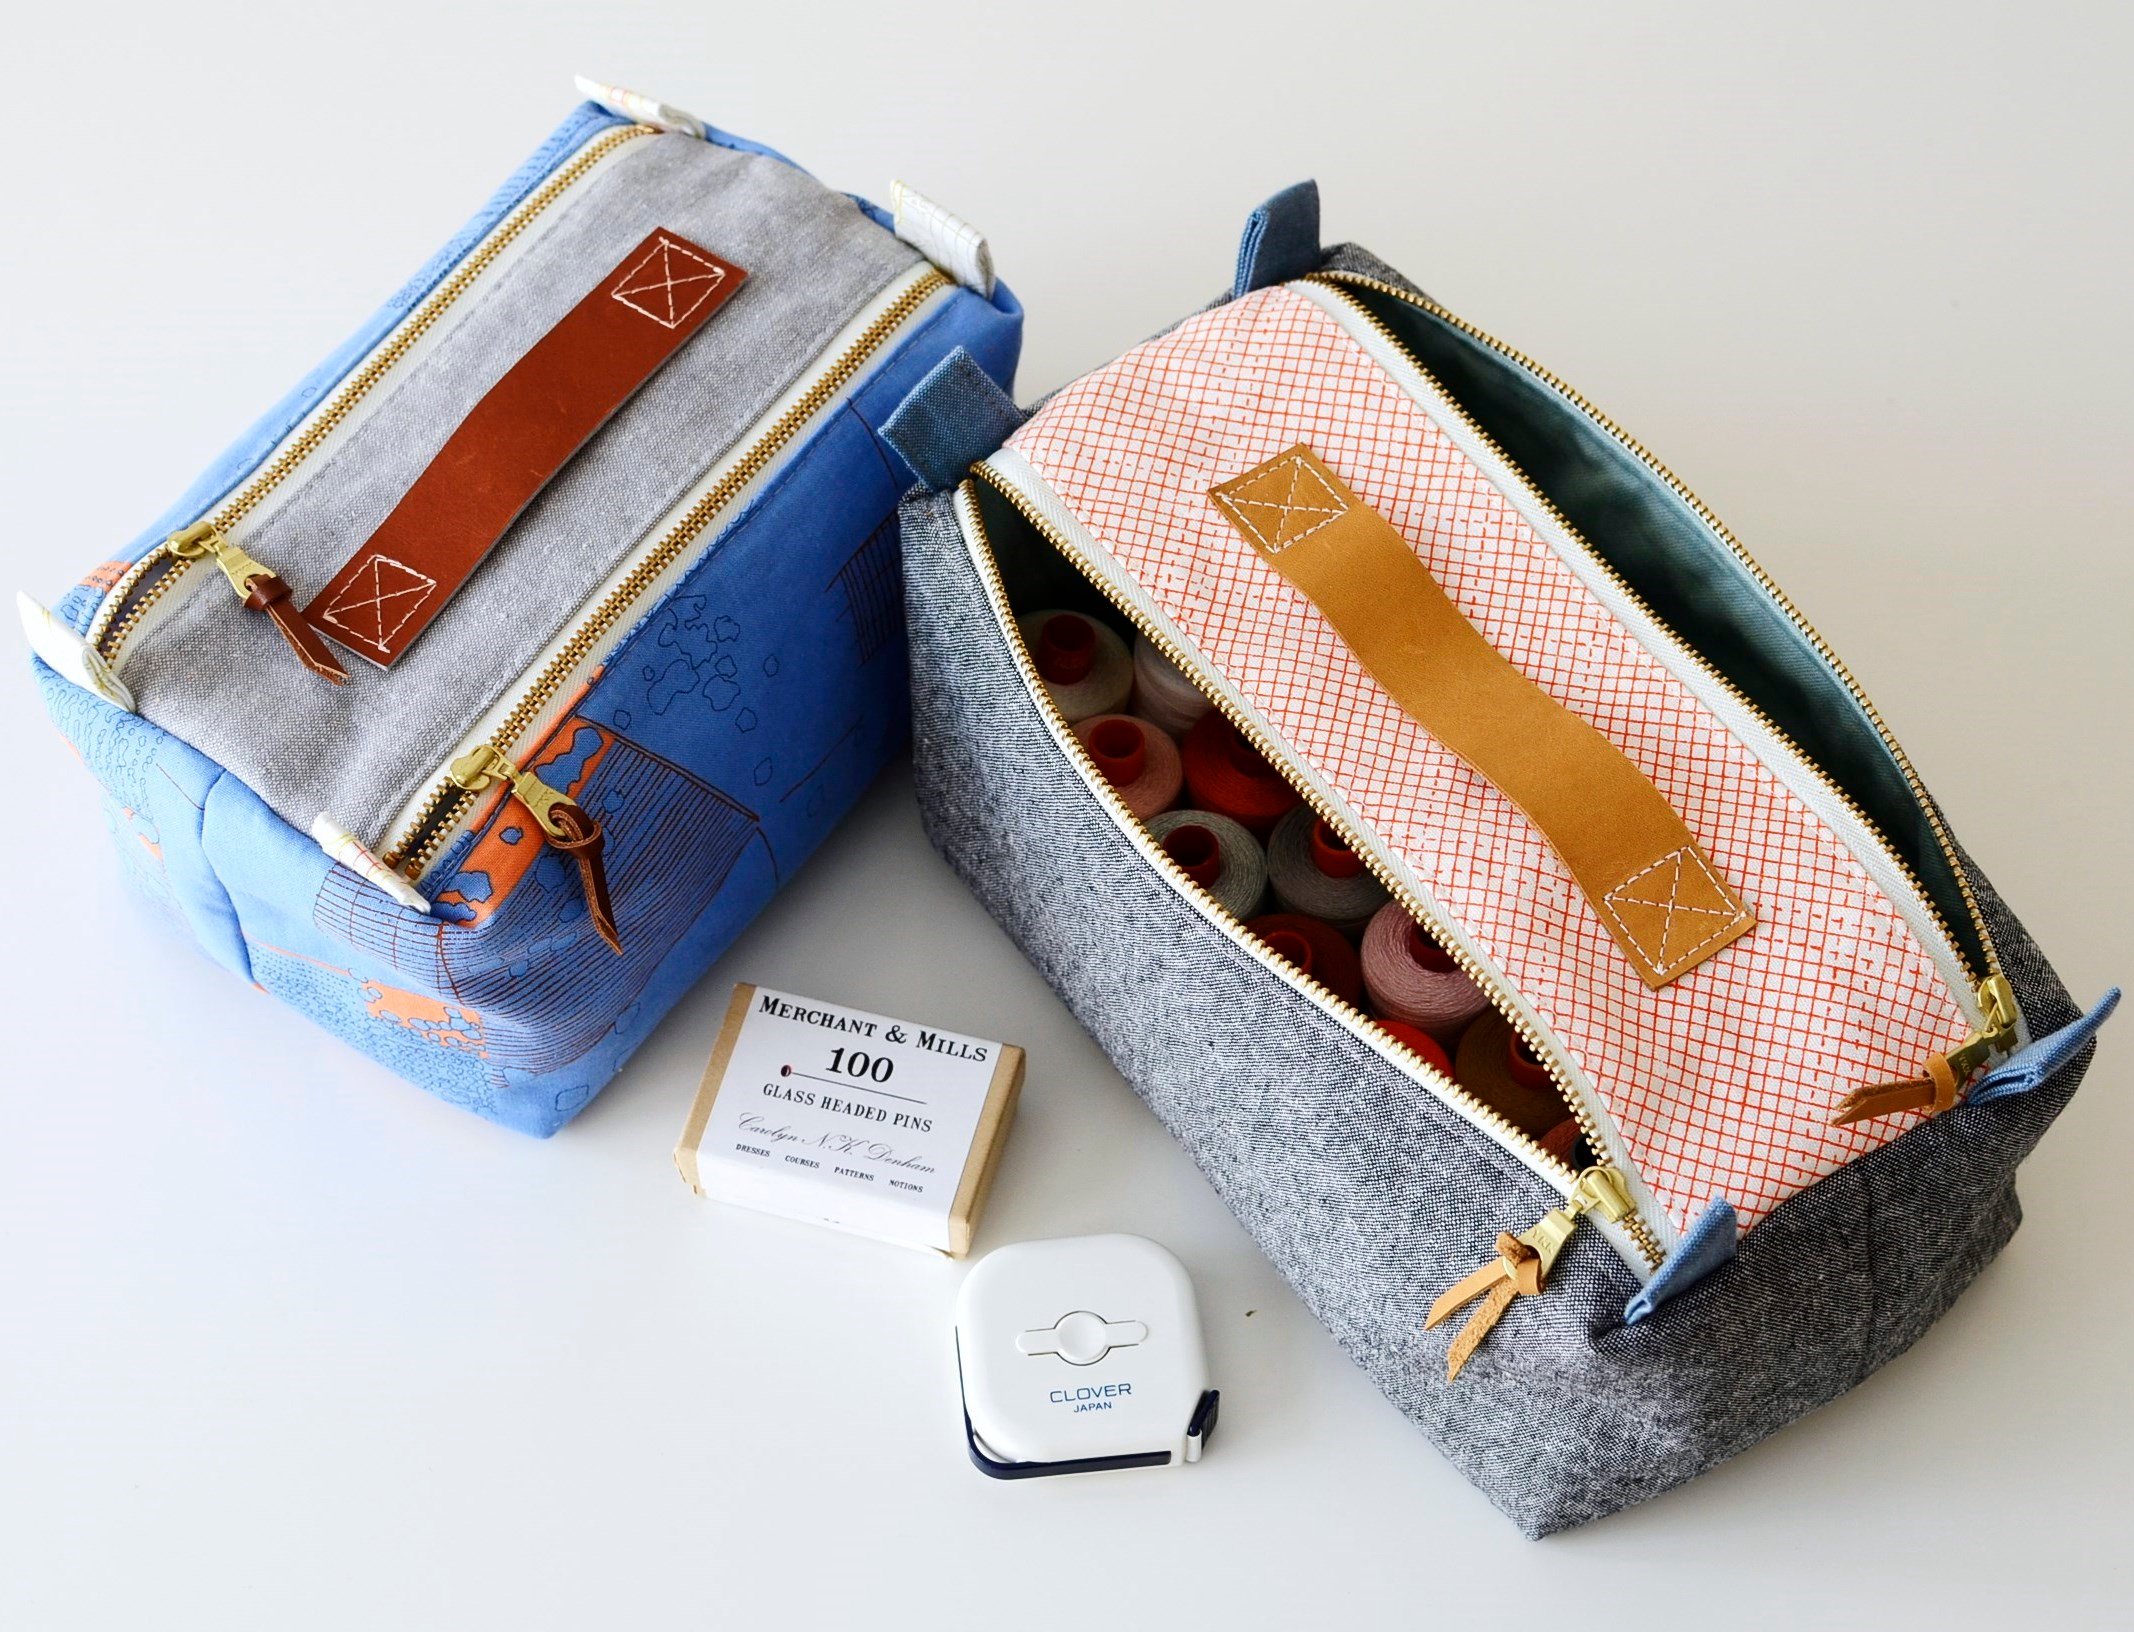 BOXED Zipper Pouch In 2 Sizes - Printable Tutorial PDF